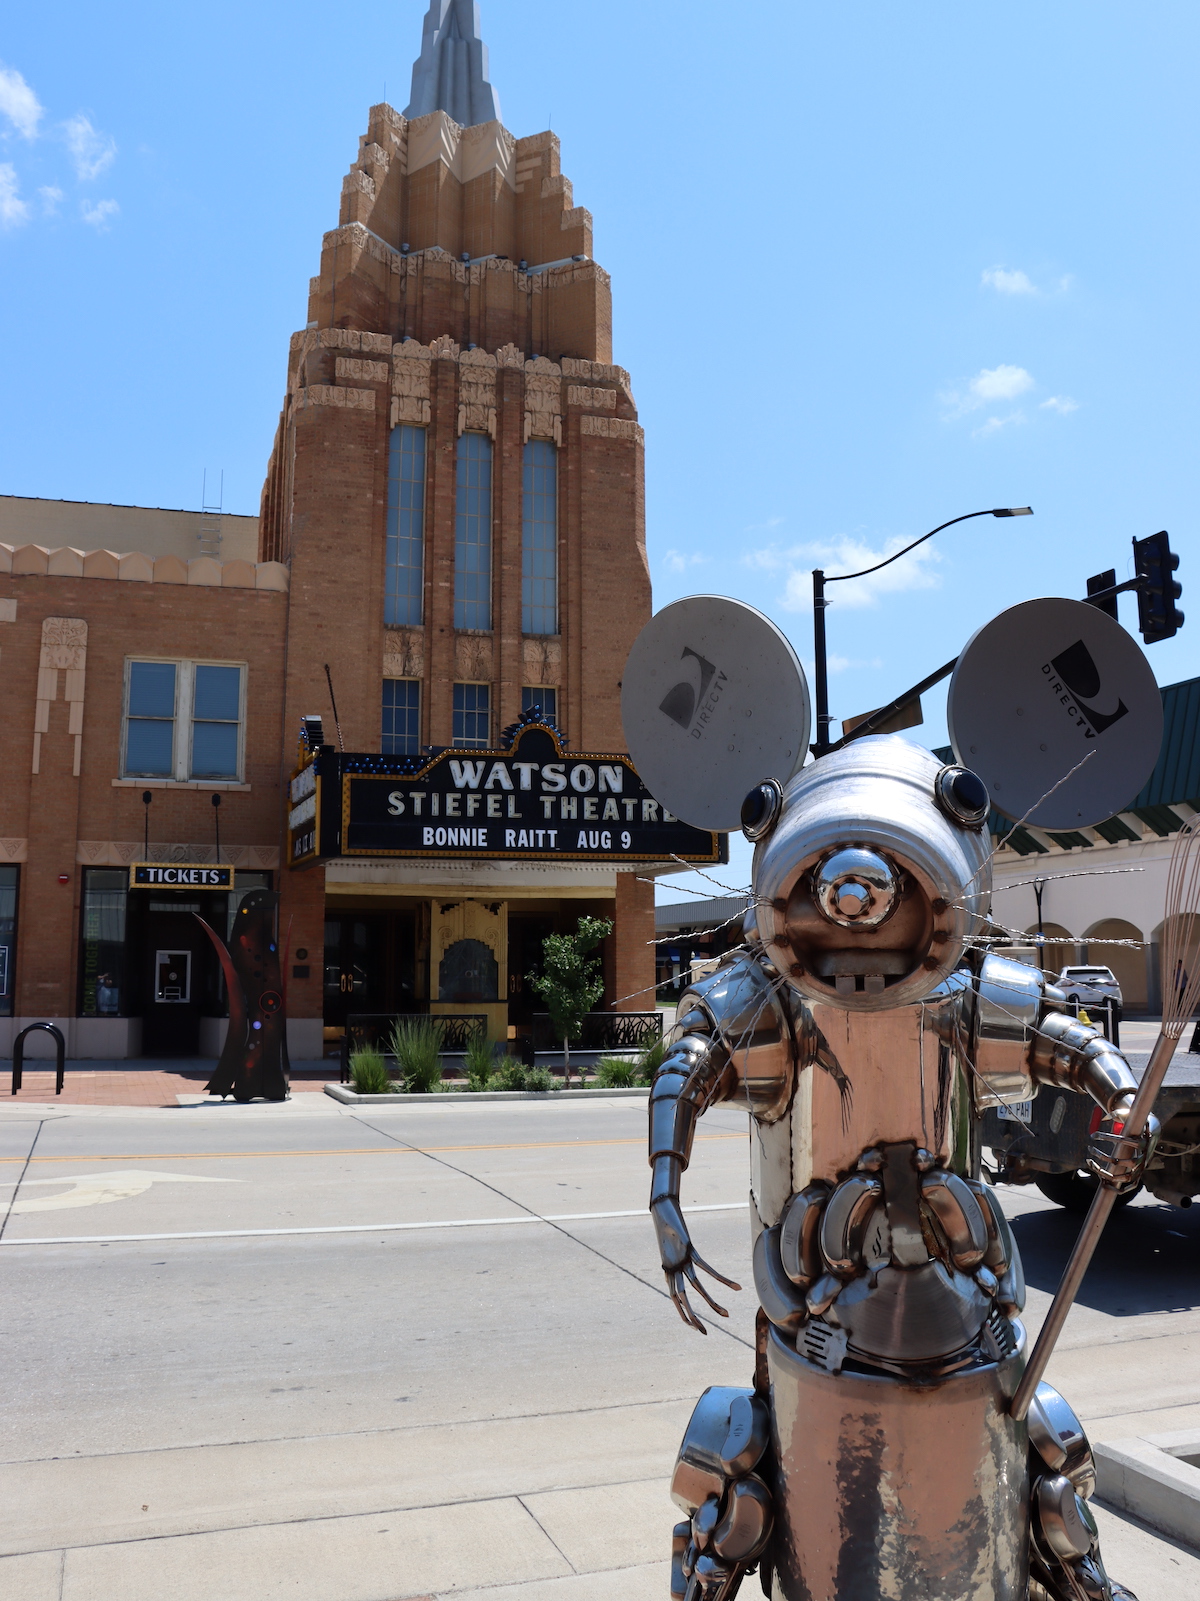 Sculpture of mouse made from discarded junk in Salina, Kansas